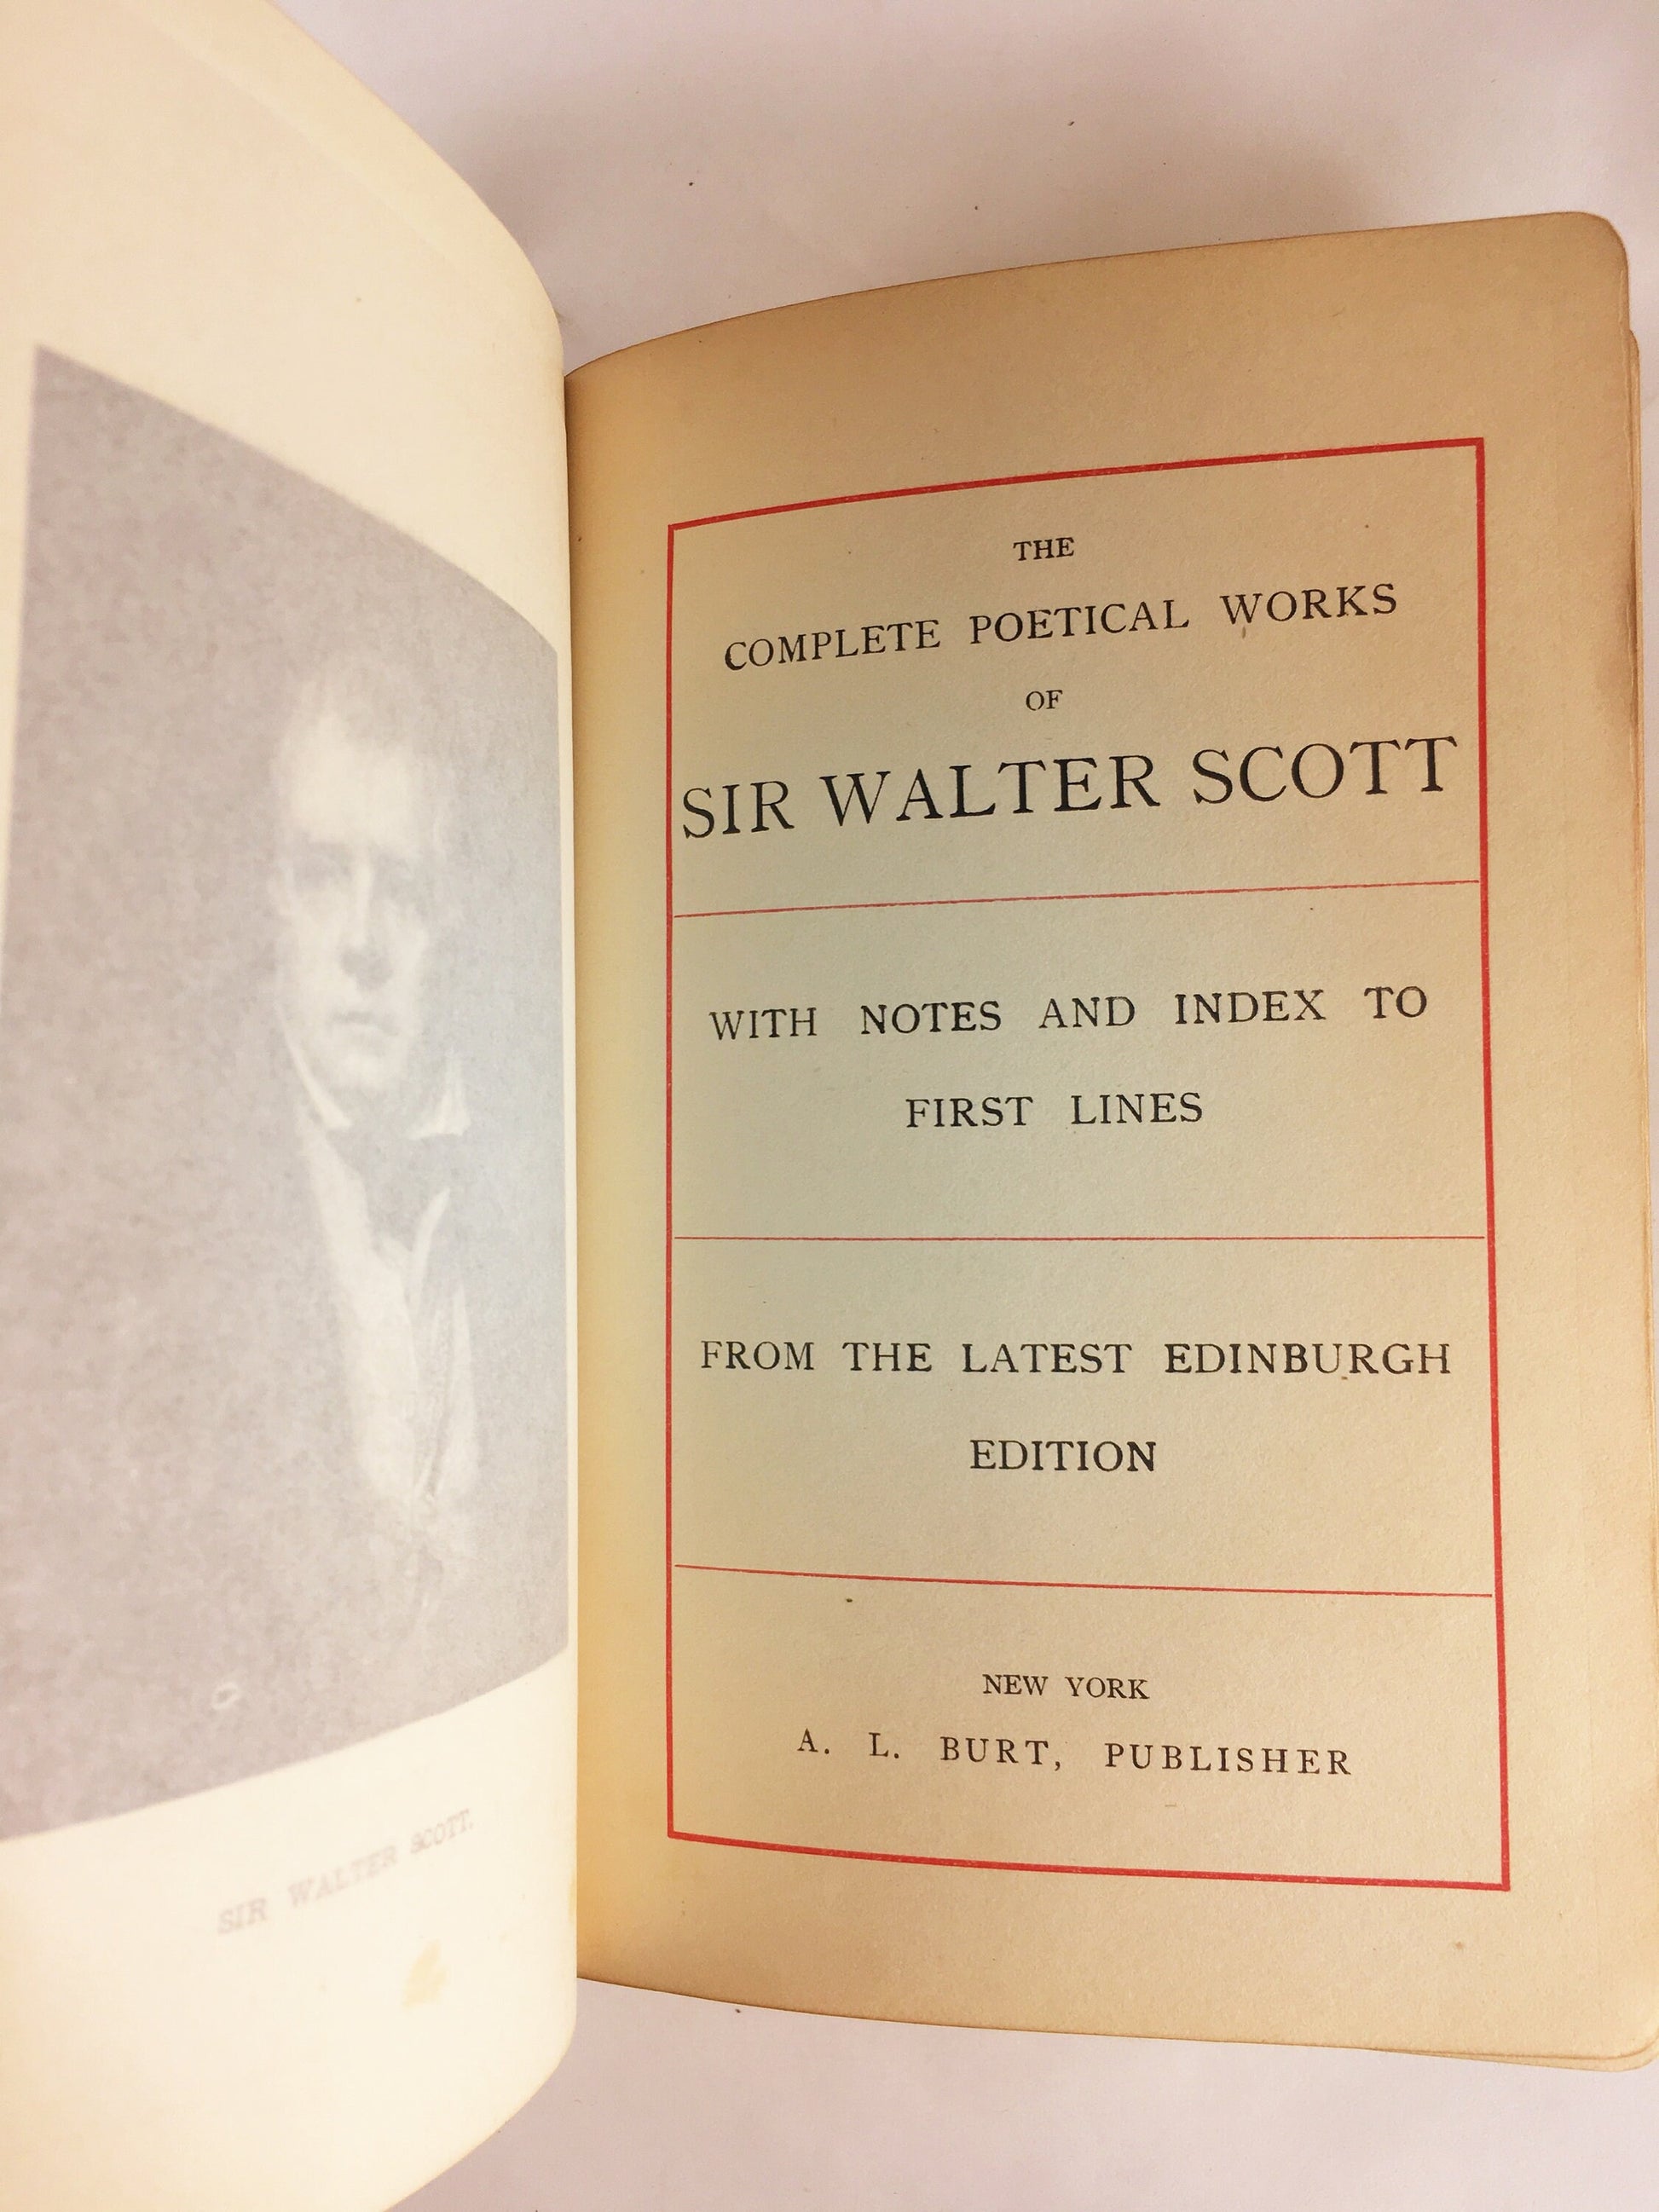 1850 Poetical Works of Sir Walter Scott Vintage blue leather book gilt tooling marbled end papers. Antique home office decor